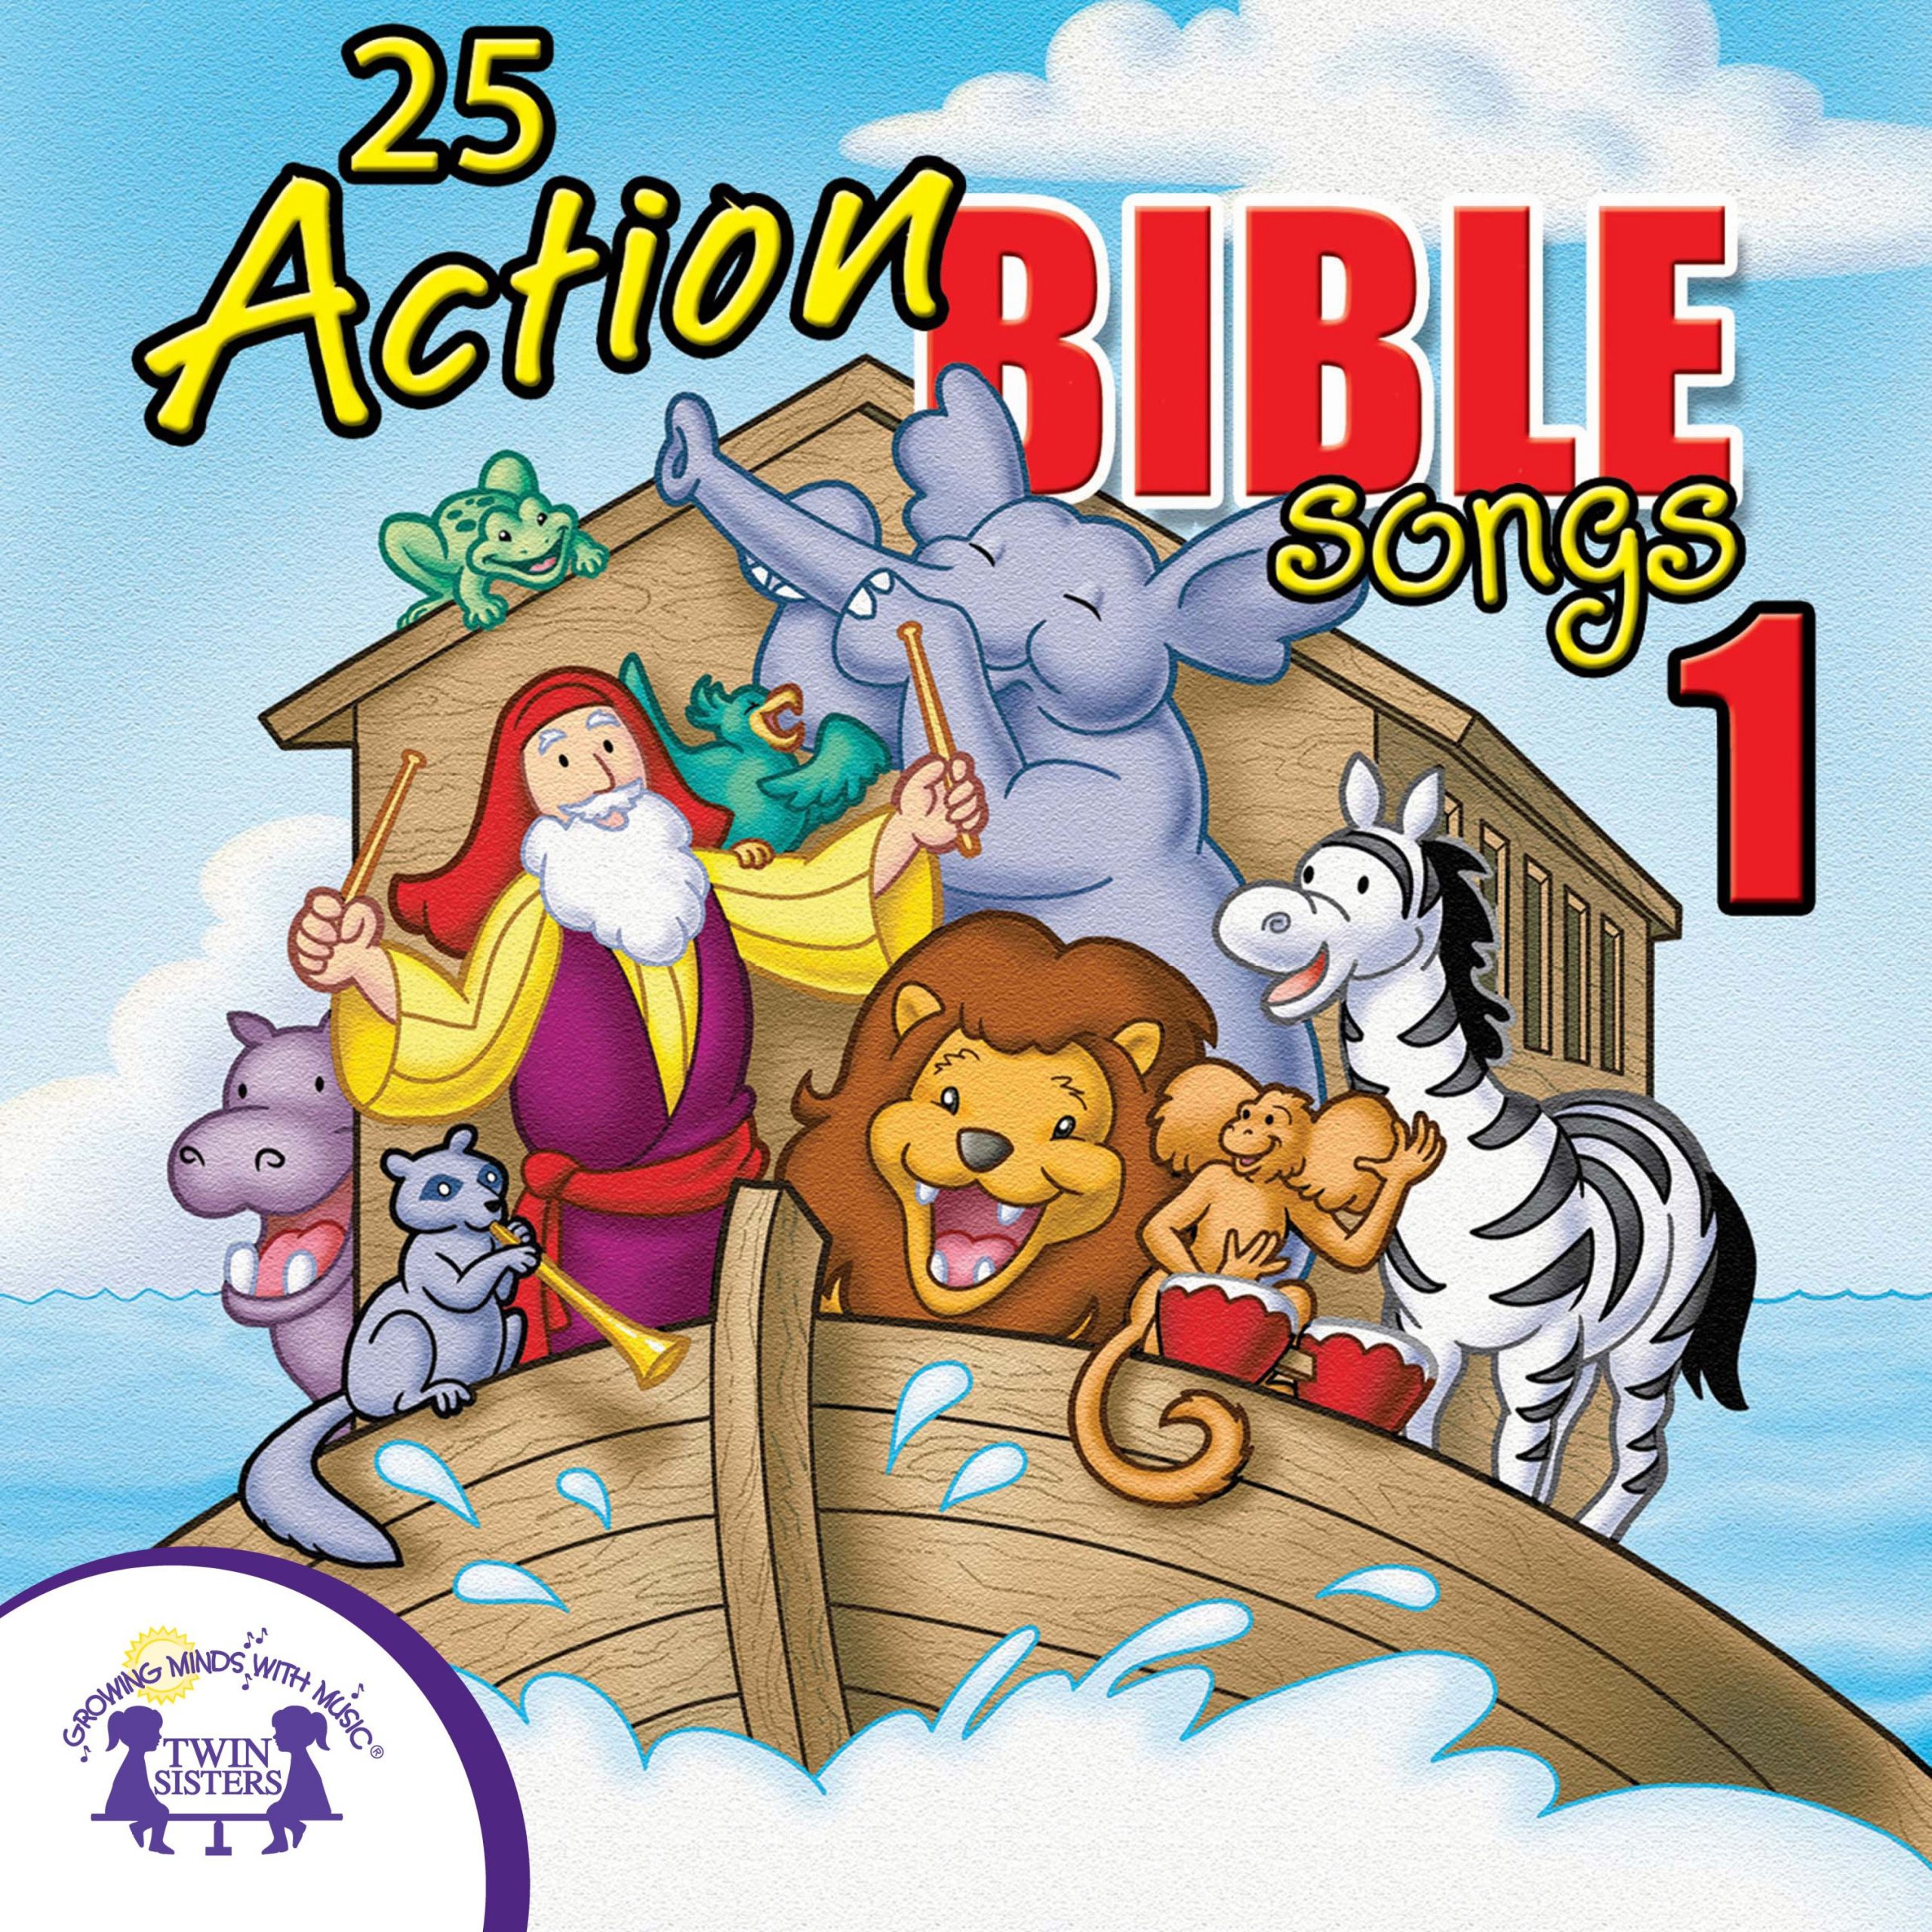 25 Action Bible Songs 1 | Twin Sisters